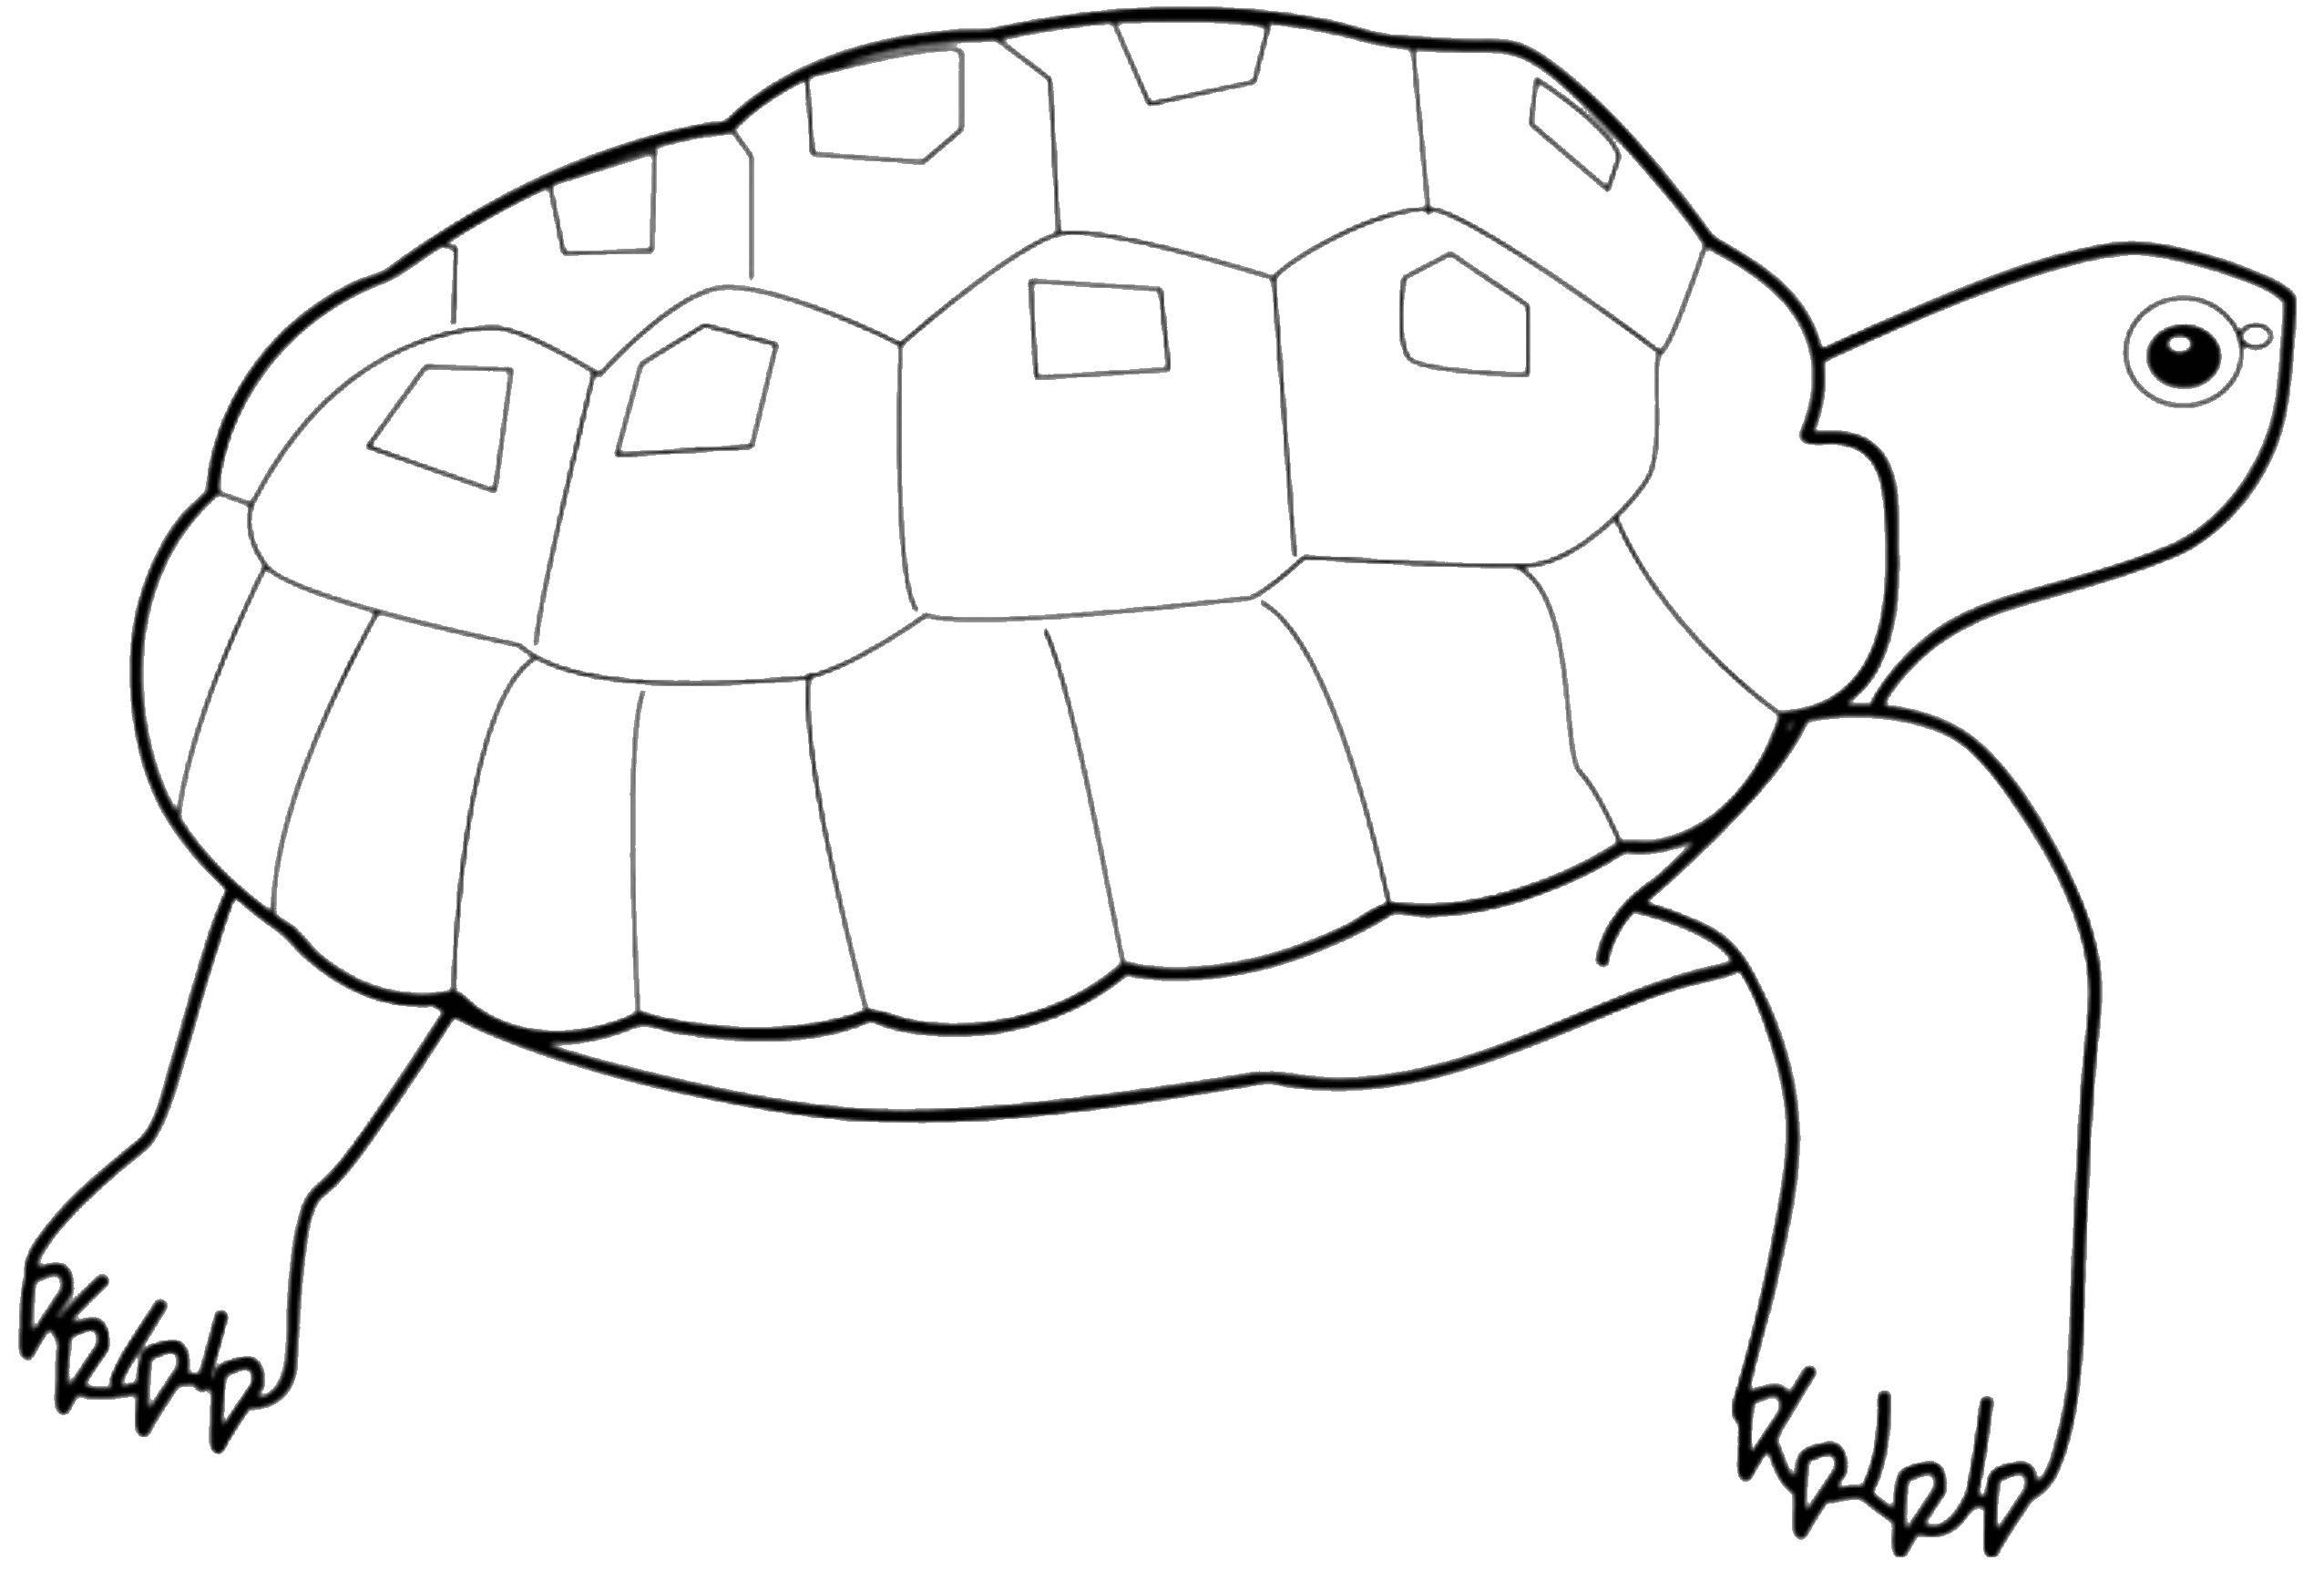 Coloring Turtle. Category Animals. Tags:  turtle.